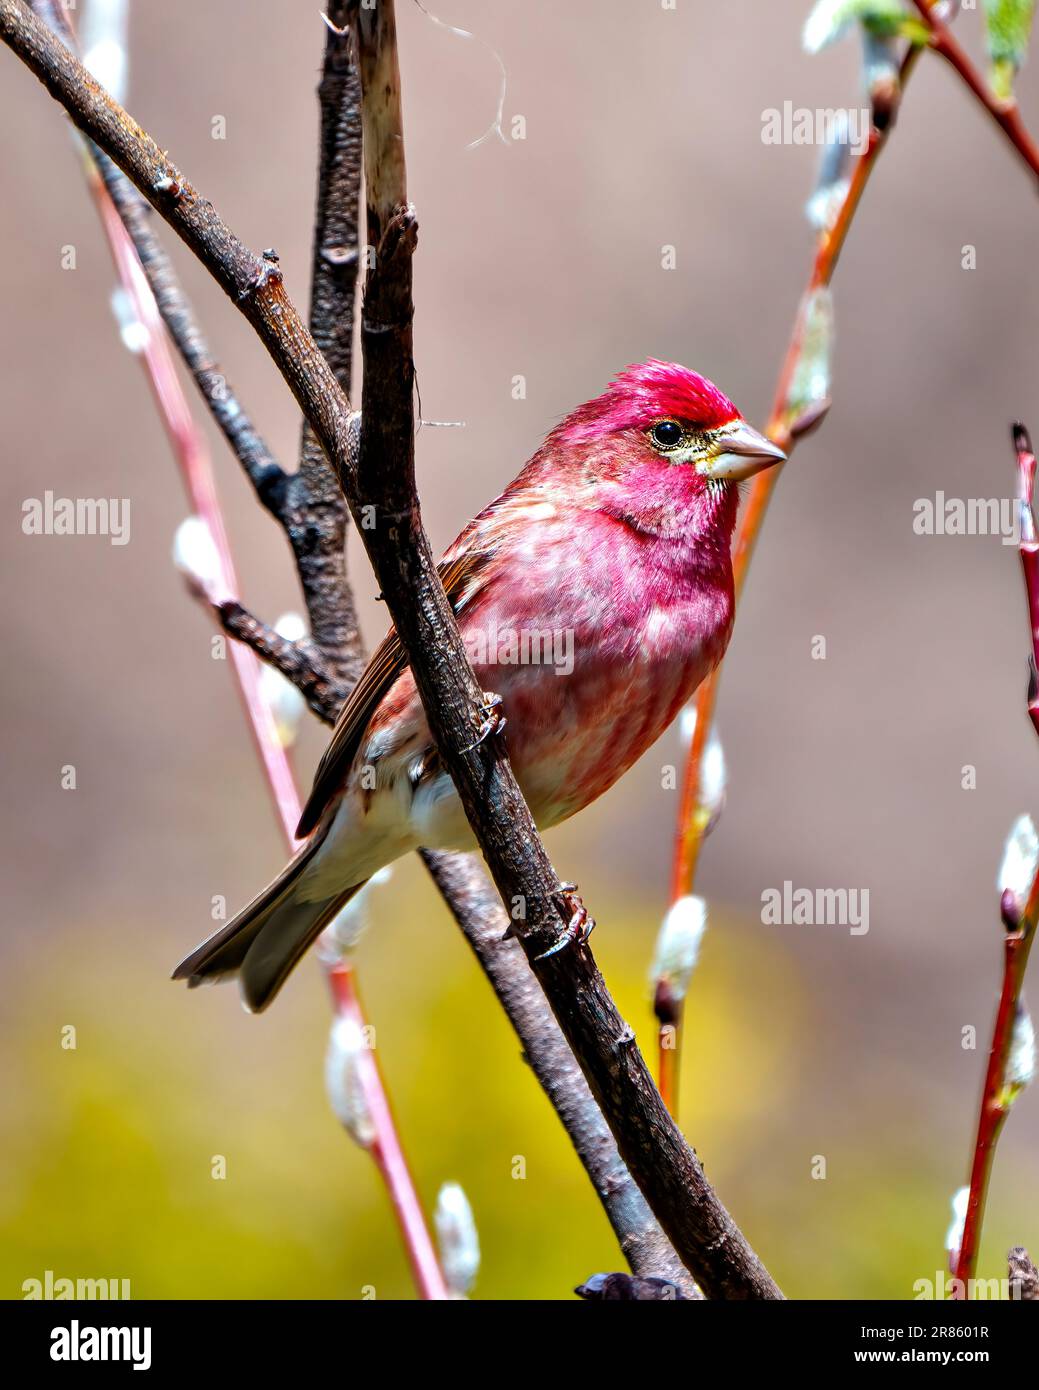 Finch male close-up side view, perched on a leaf shoot background in its environment and habitat surrounding. Purple Finch Picture. Stock Photo